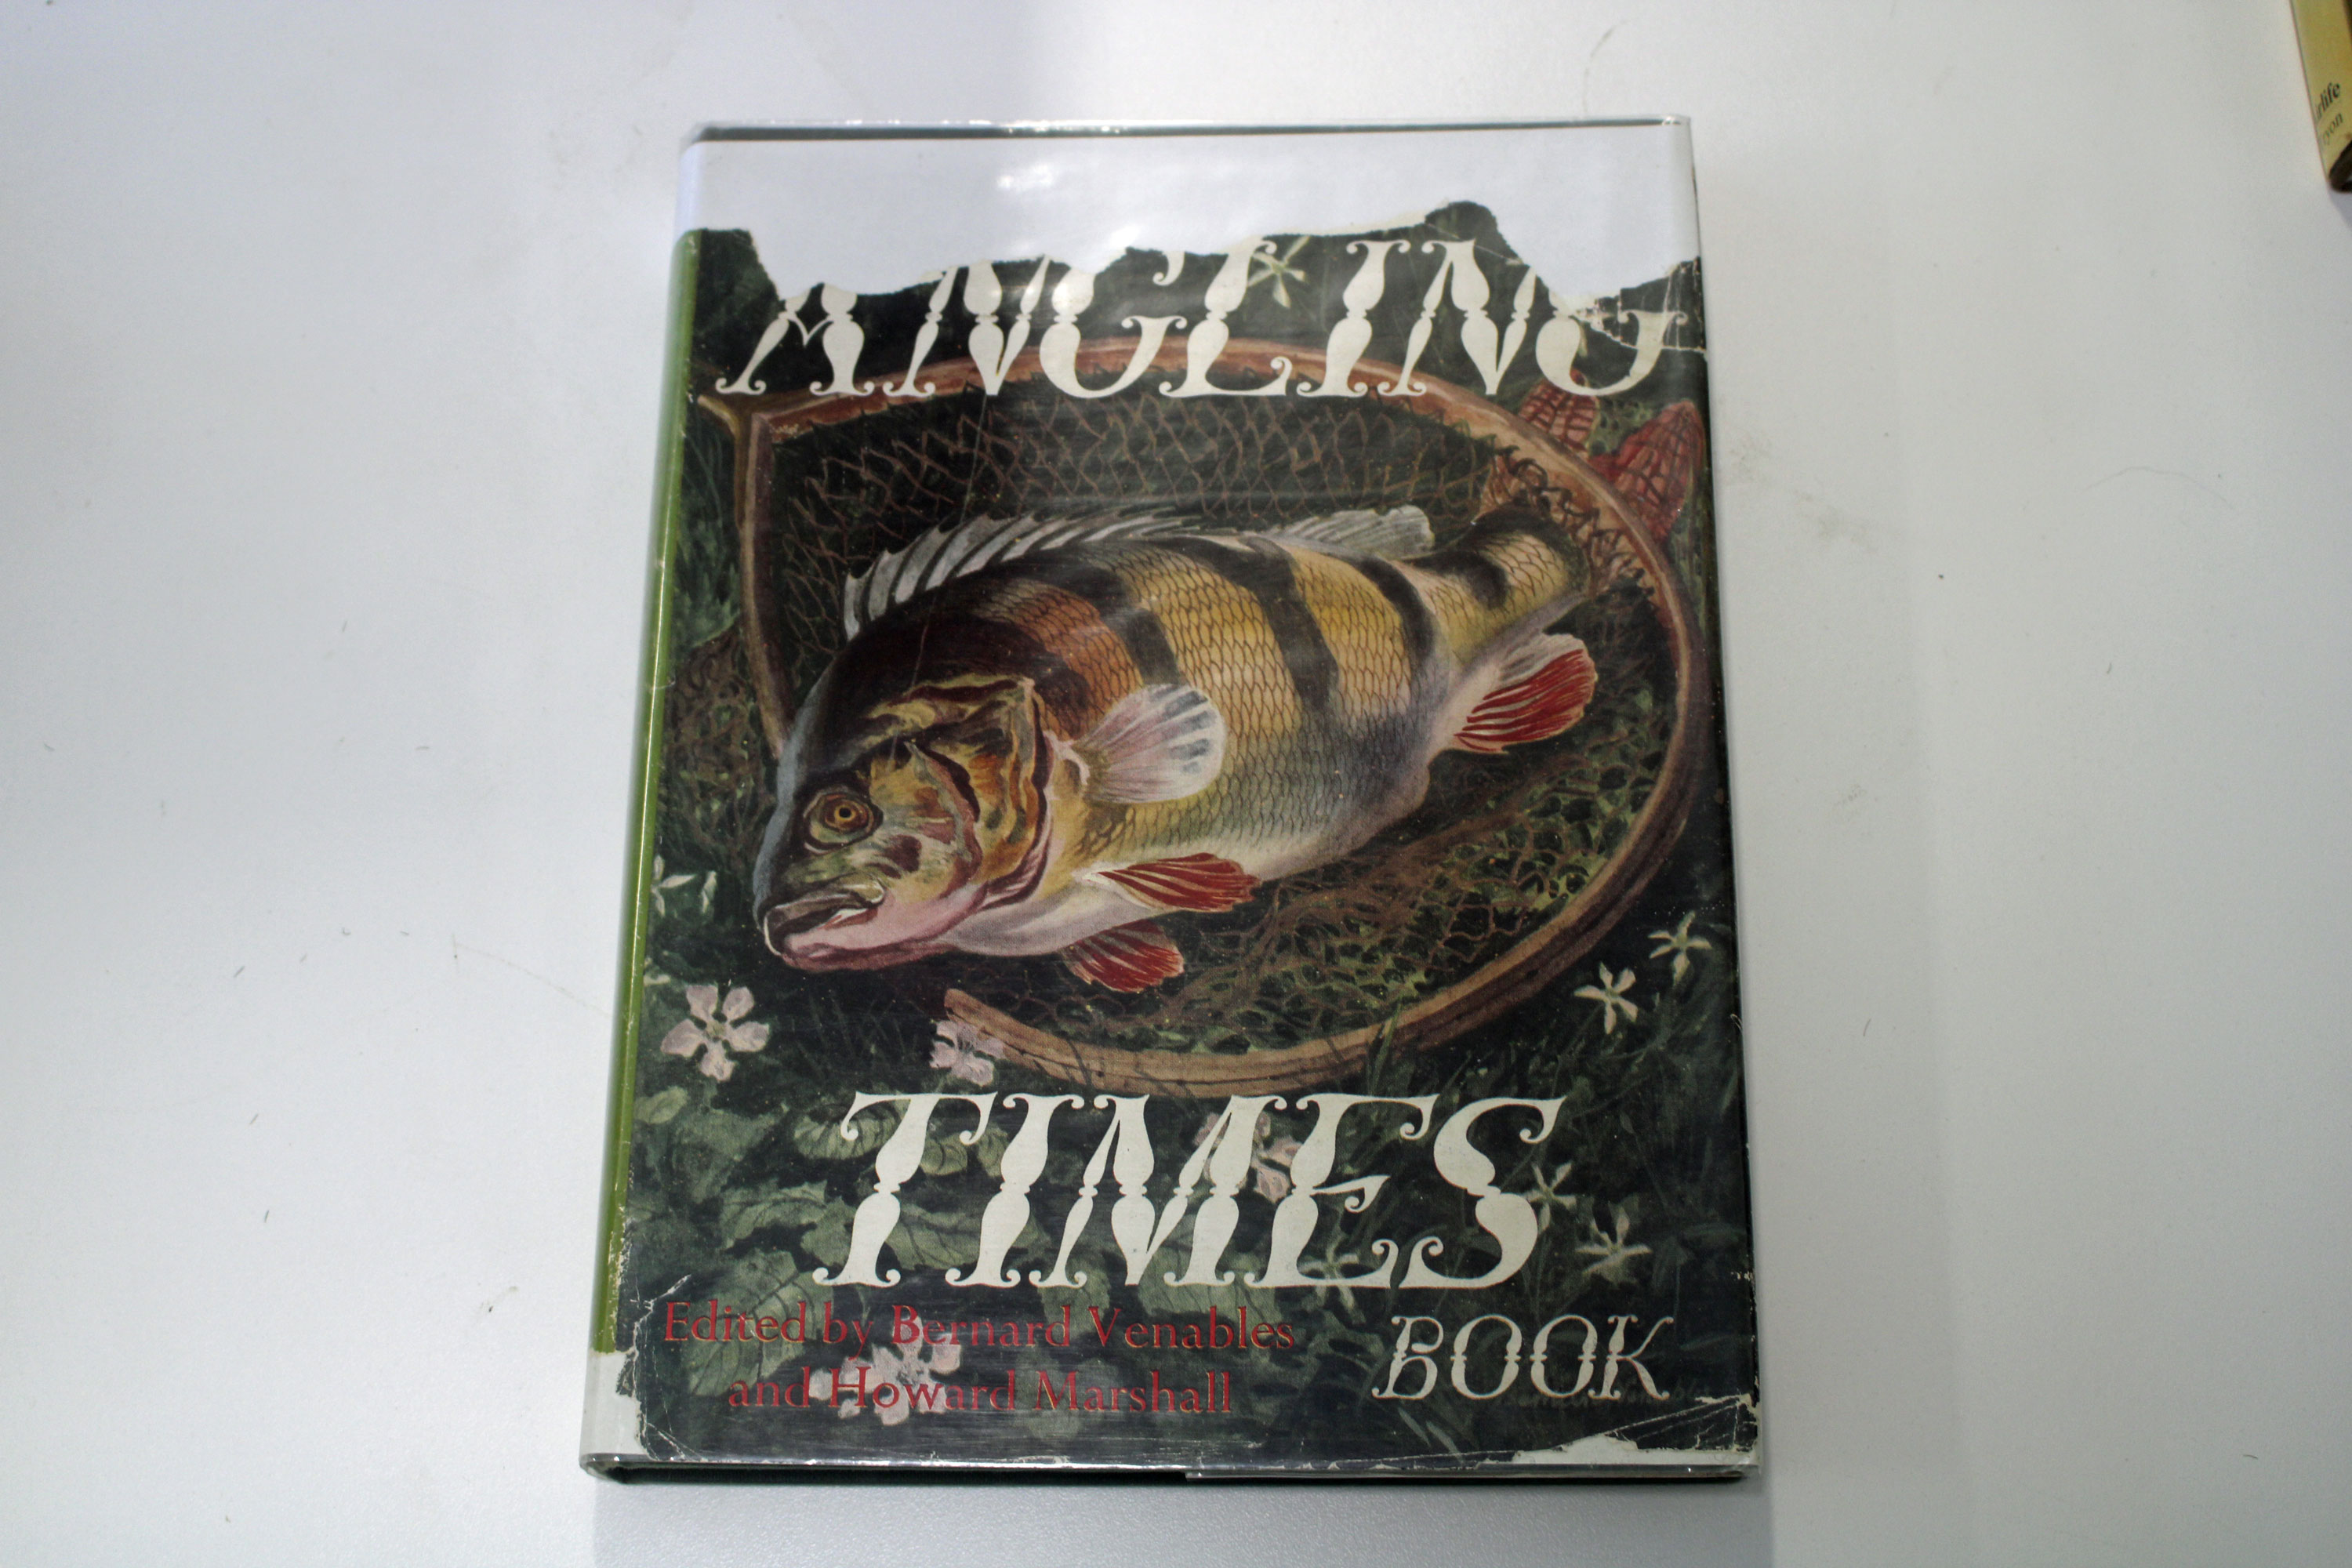 The Angling Times Book Vol 1 by Venables, Bernard and Marshall